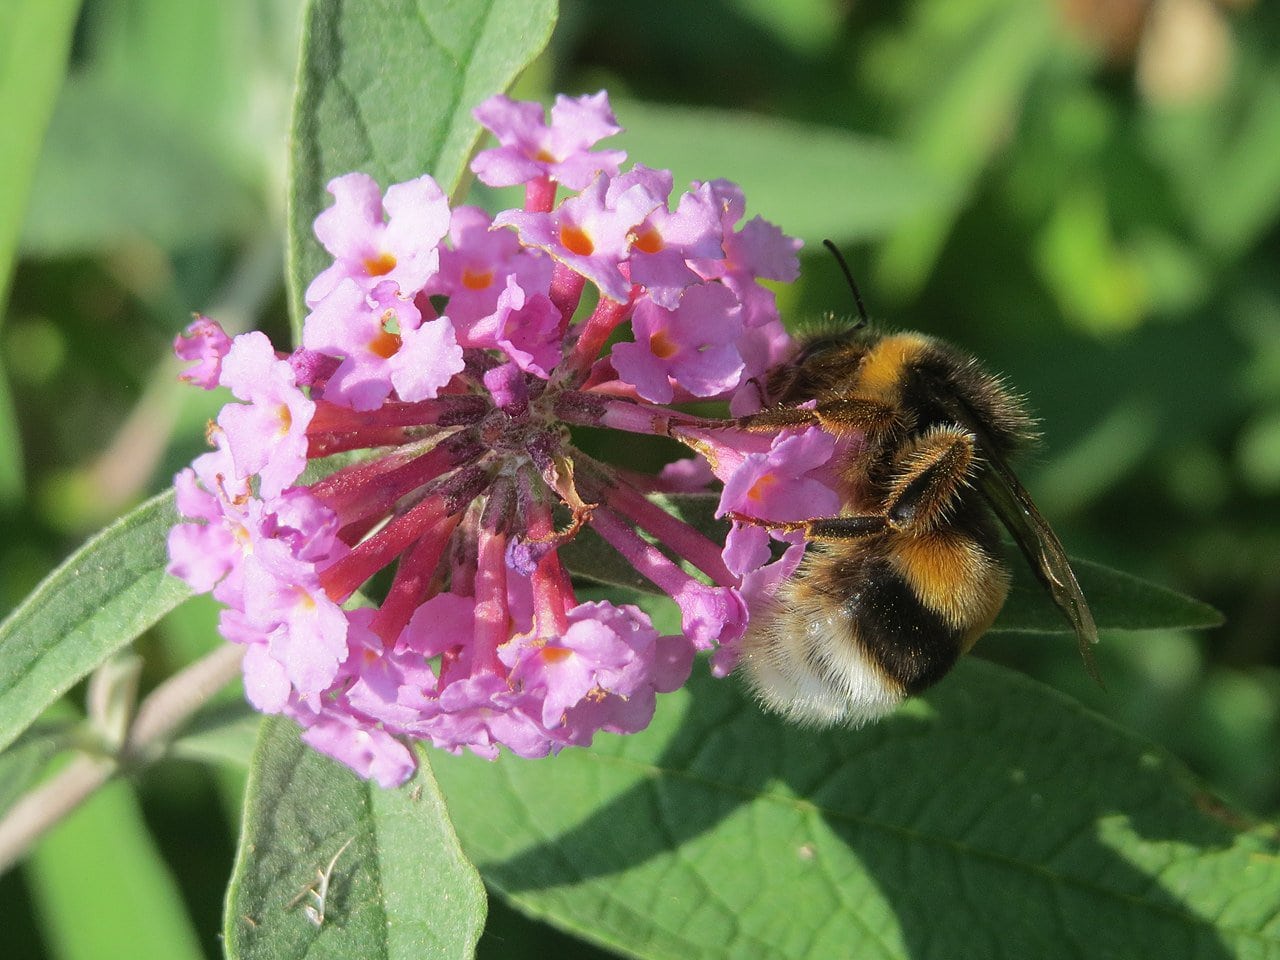 a bumblebee perching on  Buddleja davidii, an invasive plant in some parts of the world